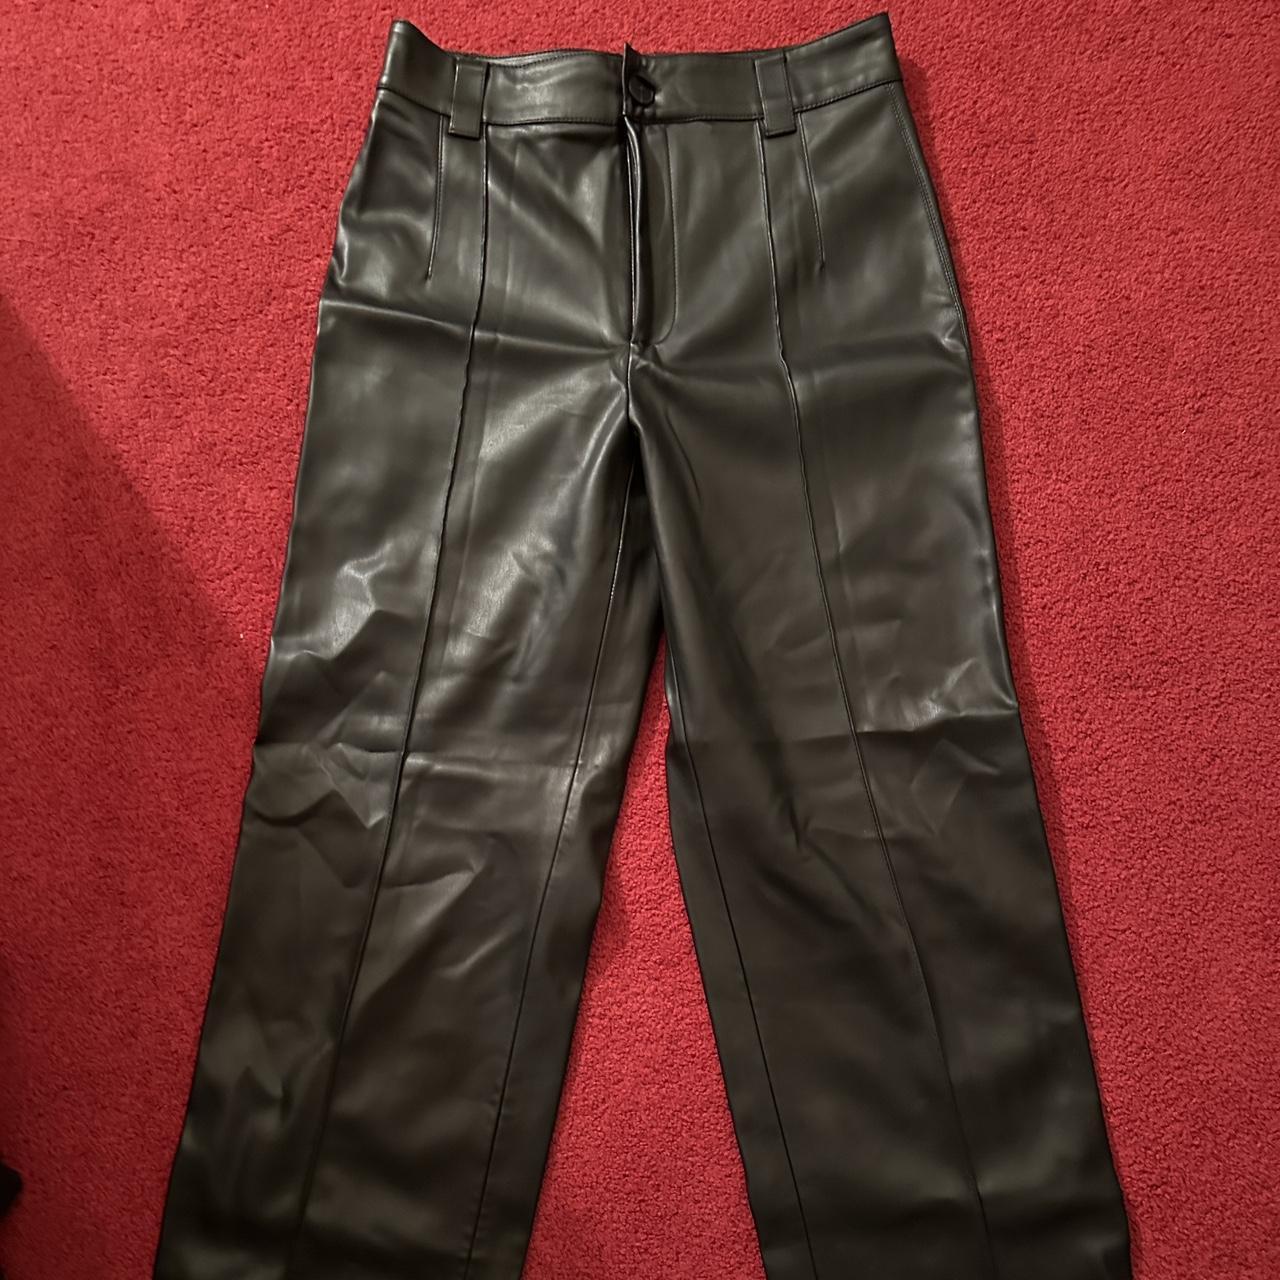 ZARA leather pants. Worn three times and has no... - Depop